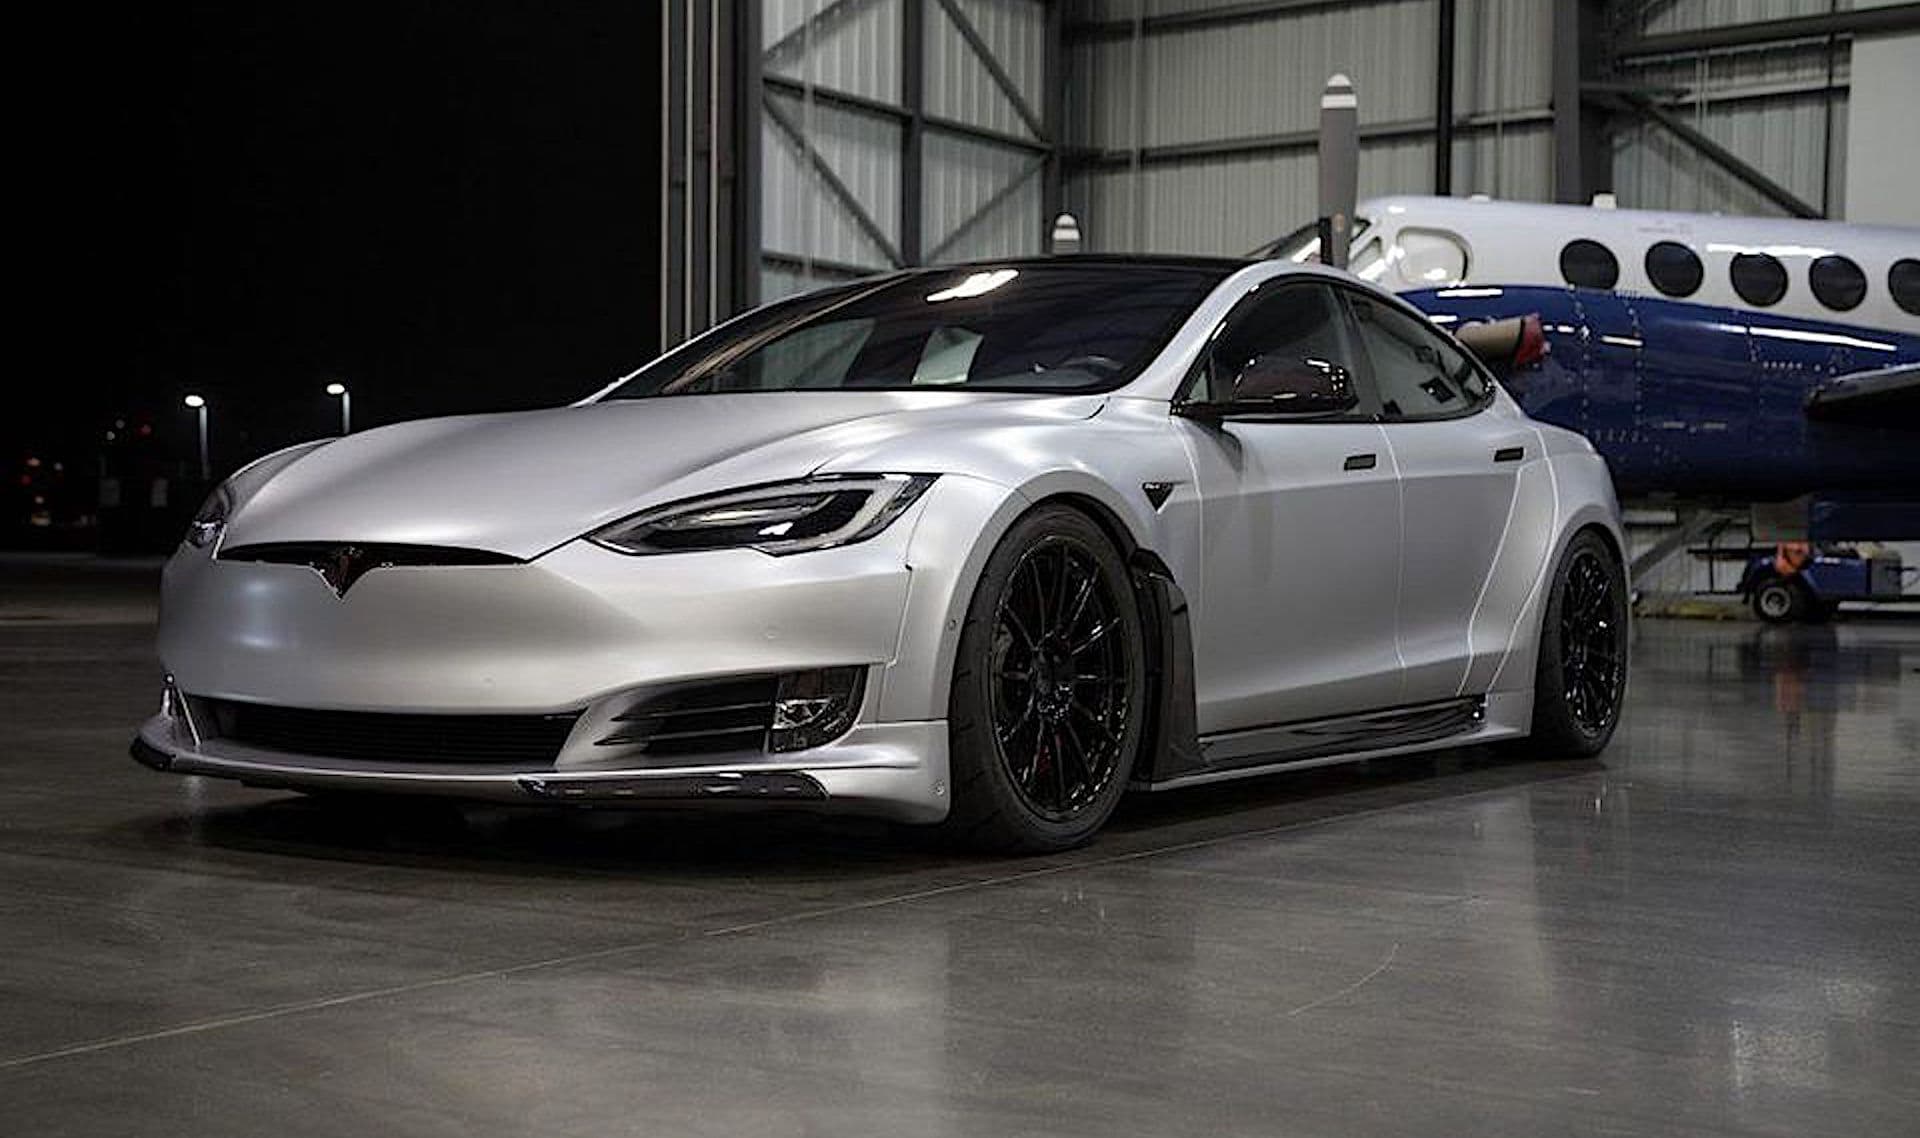 SEMA 2018: Widebody Tesla Model S P100D Scrapes the Ground and Runs 10-Second Quarter-Mile Times